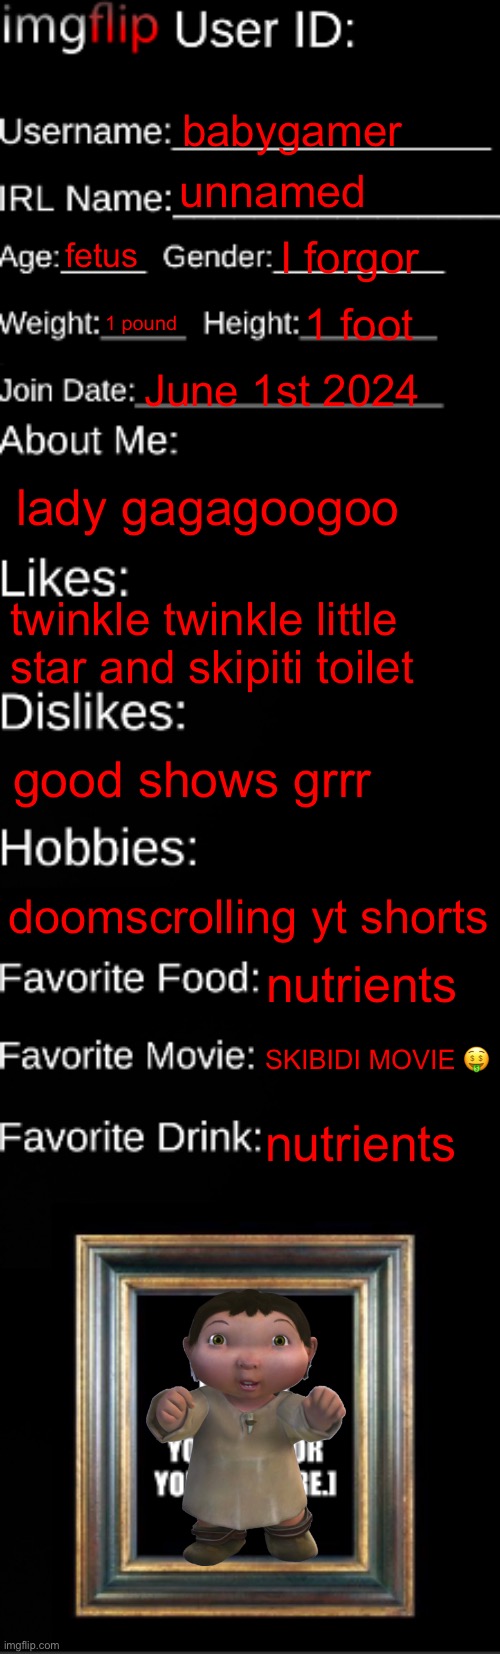 imgflip ID Card | babygamer; unnamed; fetus; I forgor; 1 pound; 1 foot; June 1st 2024; lady gagagoogoo; twinkle twinkle little star and skipiti toilet; good shows grrr; doomscrolling yt shorts; nutrients; SKIBIDI MOVIE 🤑; nutrients | image tagged in imgflip id card | made w/ Imgflip meme maker